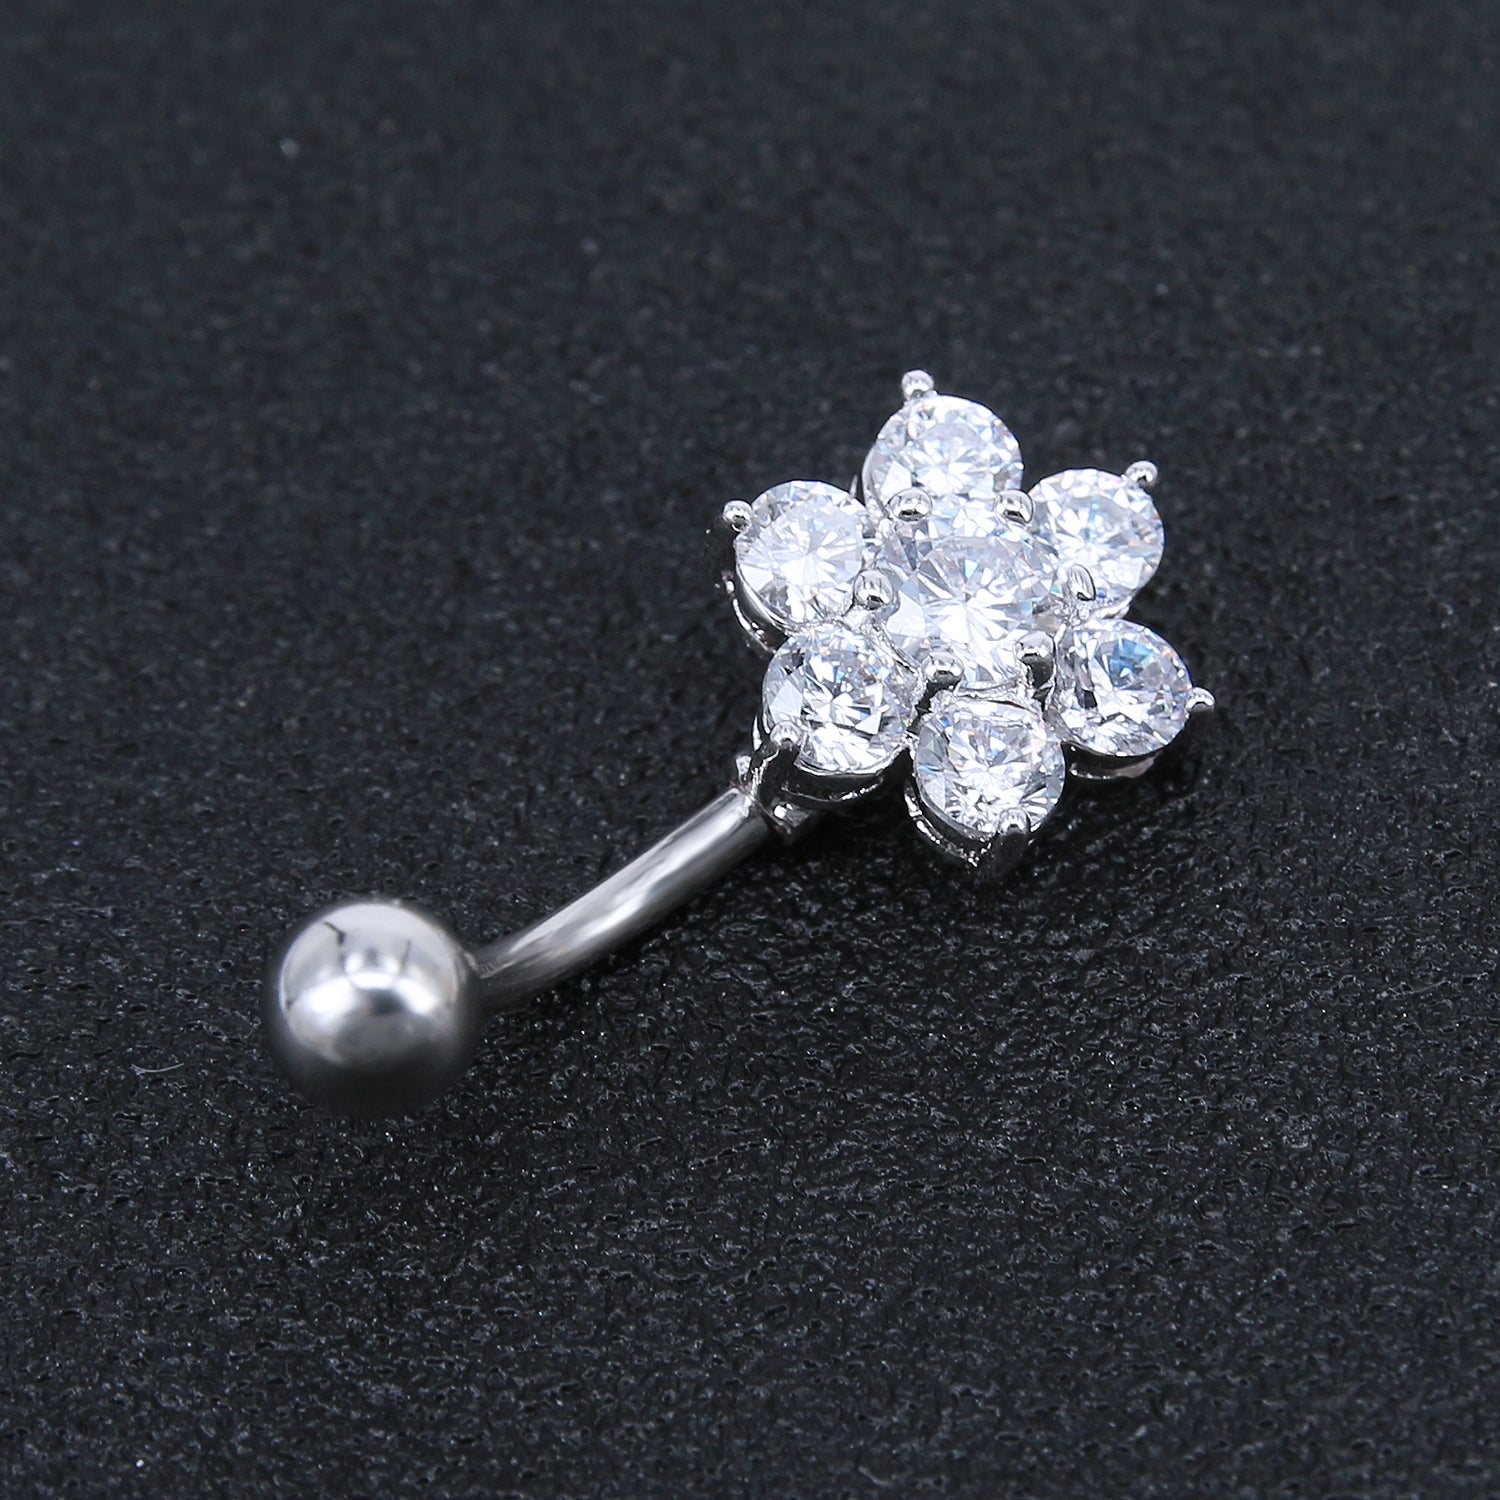 14g-Flower-Stainless-Steel-Belly-Button-Rings-Cubic-Zirconia-Navel-Rings-Jewelry